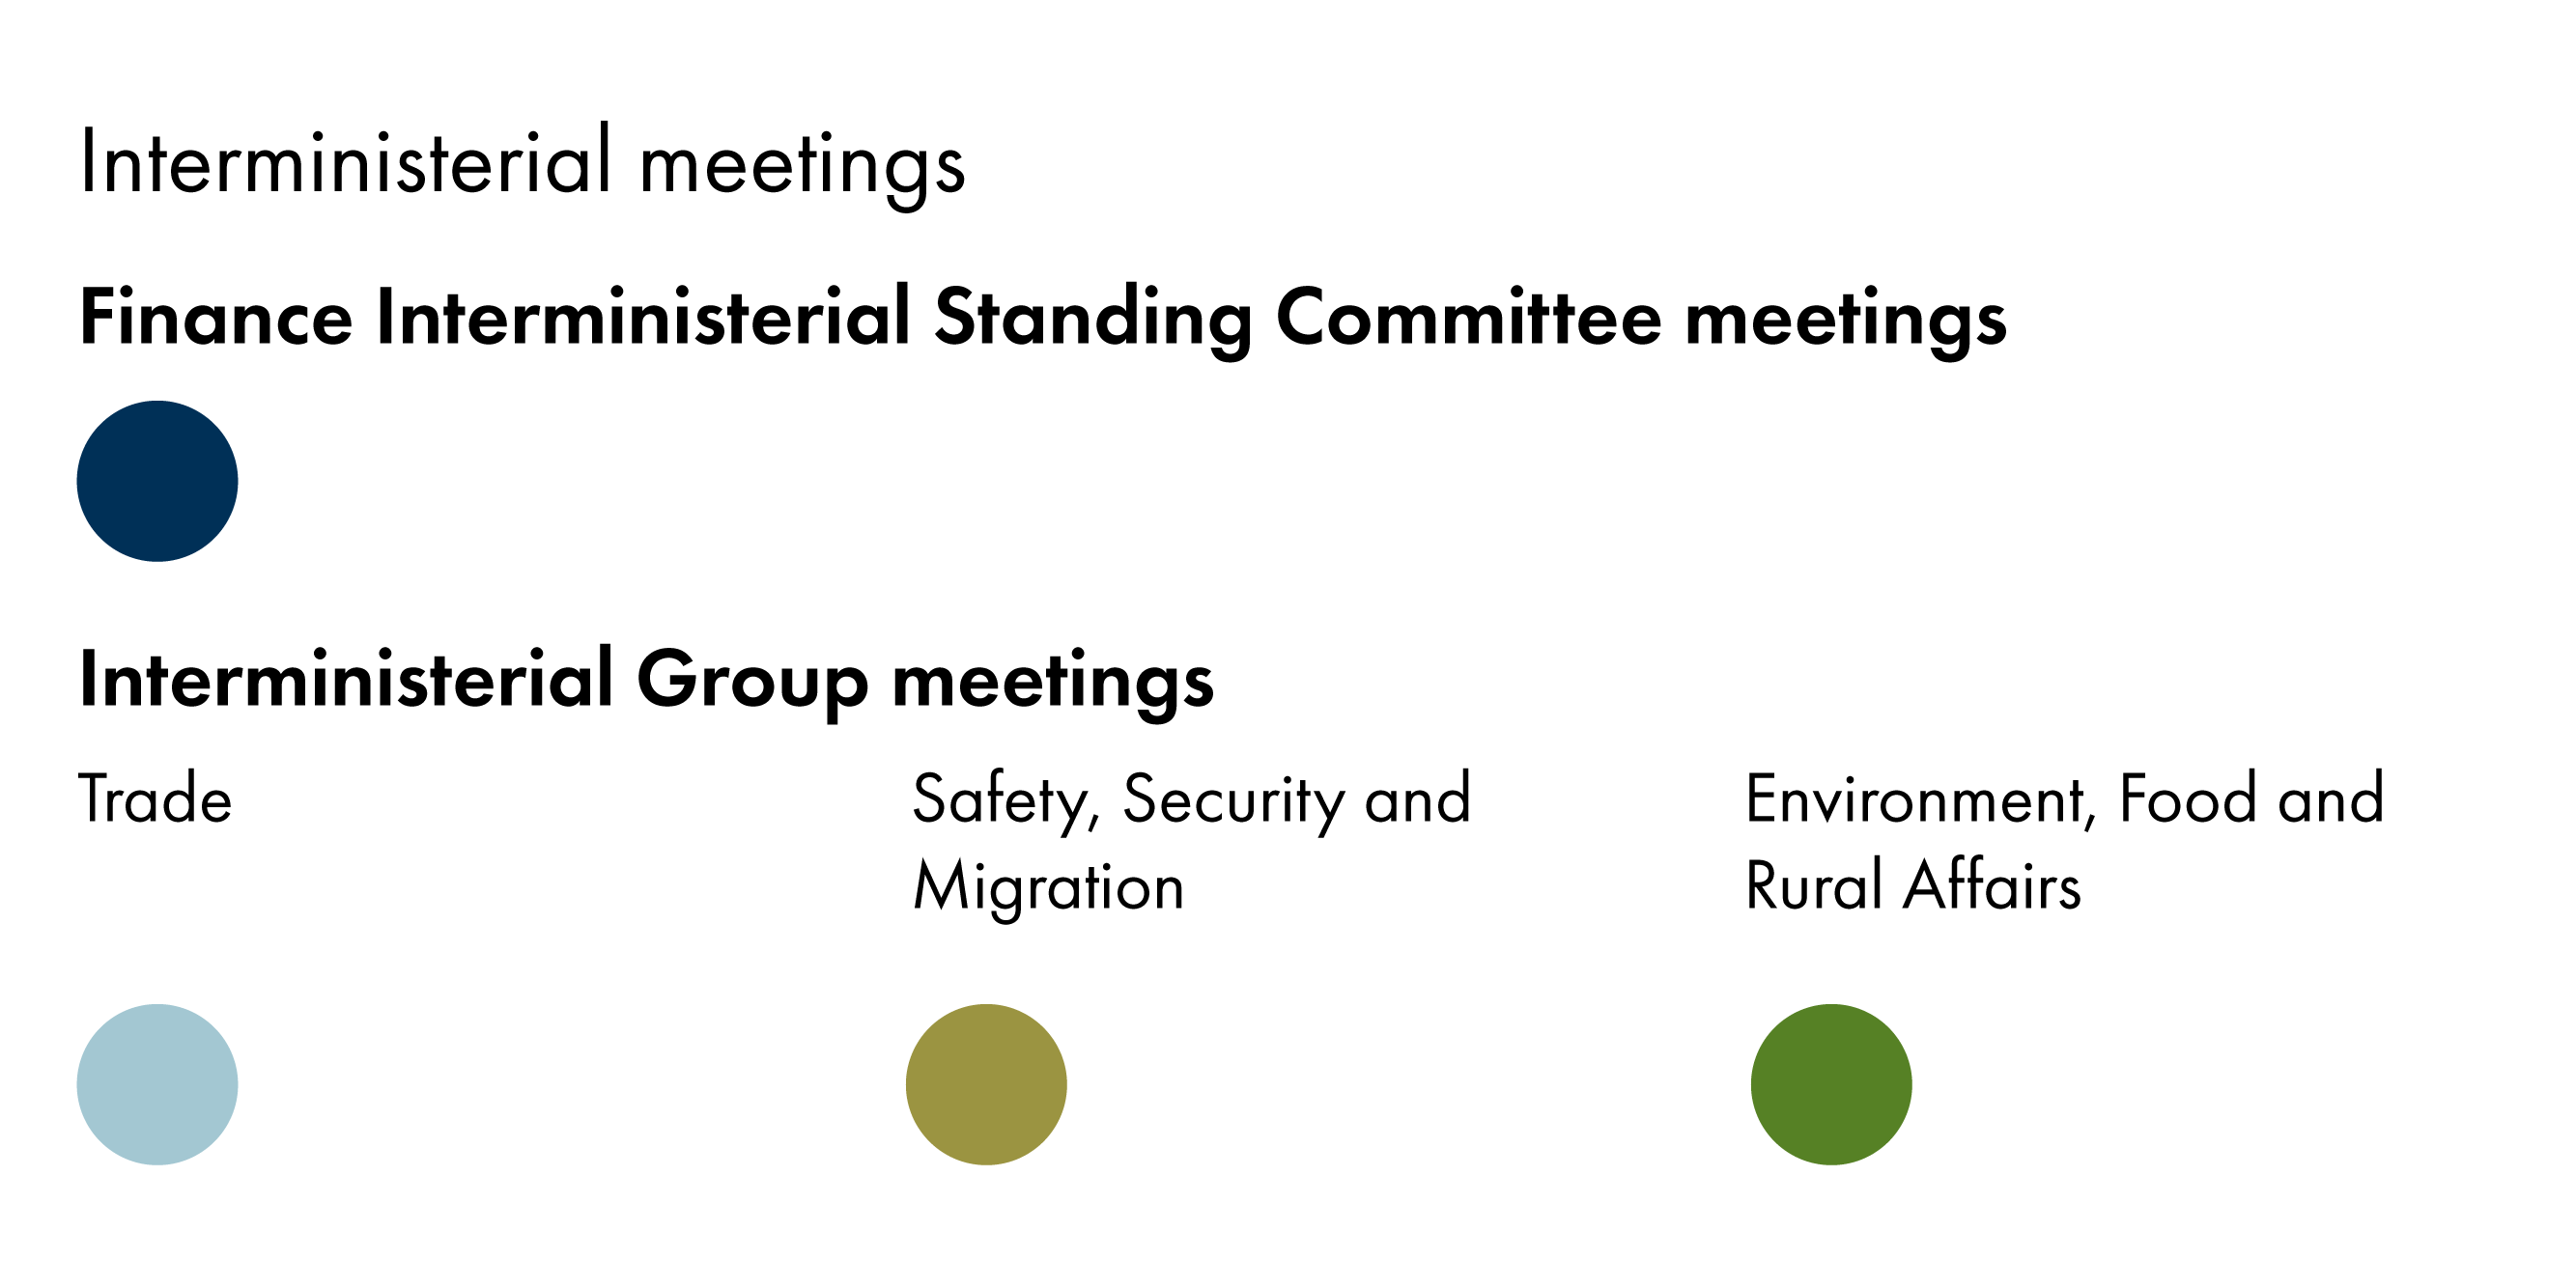 The infographic shows the number of interministerial meetings. There is one circle under 'Finance Interministerial Standing Committee', one circle under 'Interministerial Group Trade', one circle under 'Interministerial Group Safety, Security and Migration', and one circle under 'Interministerial Group Environment, Food, and Rural Affairs'.